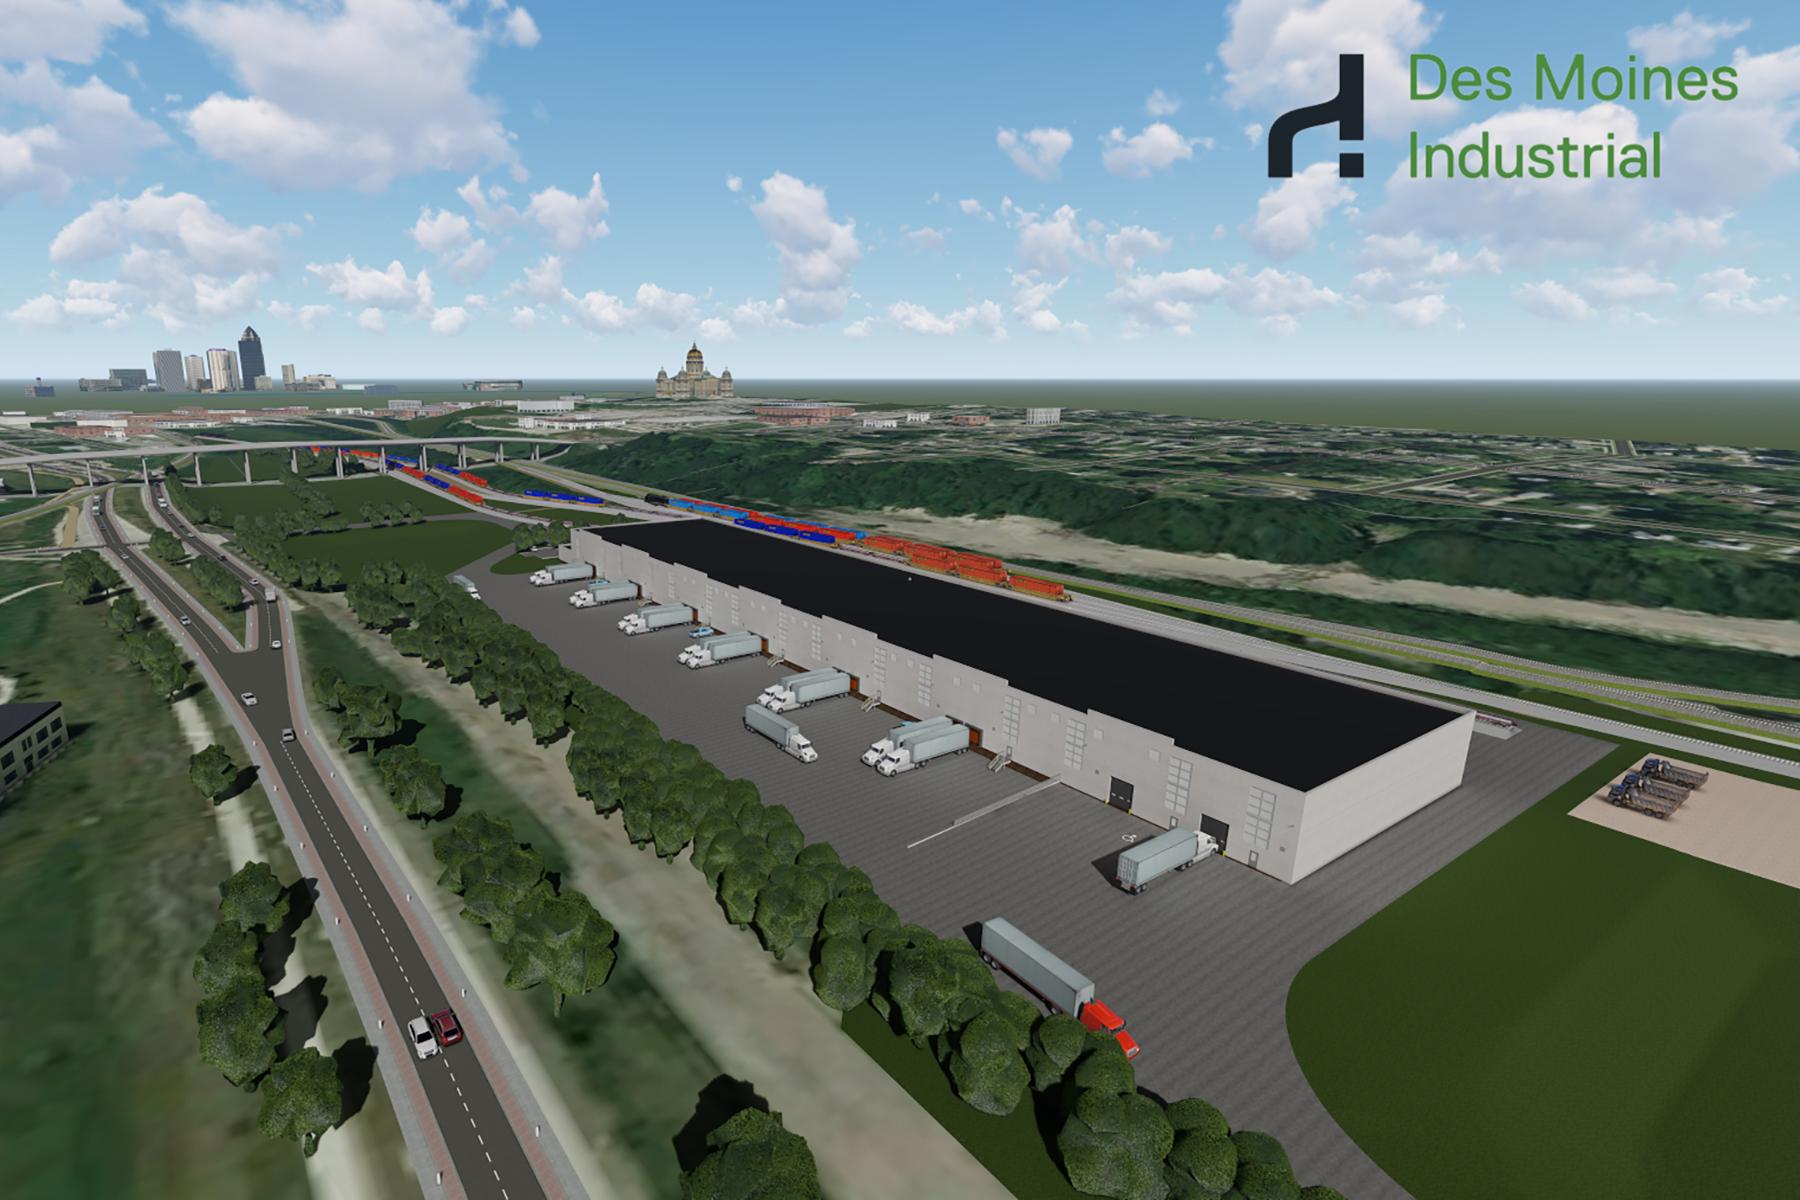 Des Moines Industrial transloading facility tendering